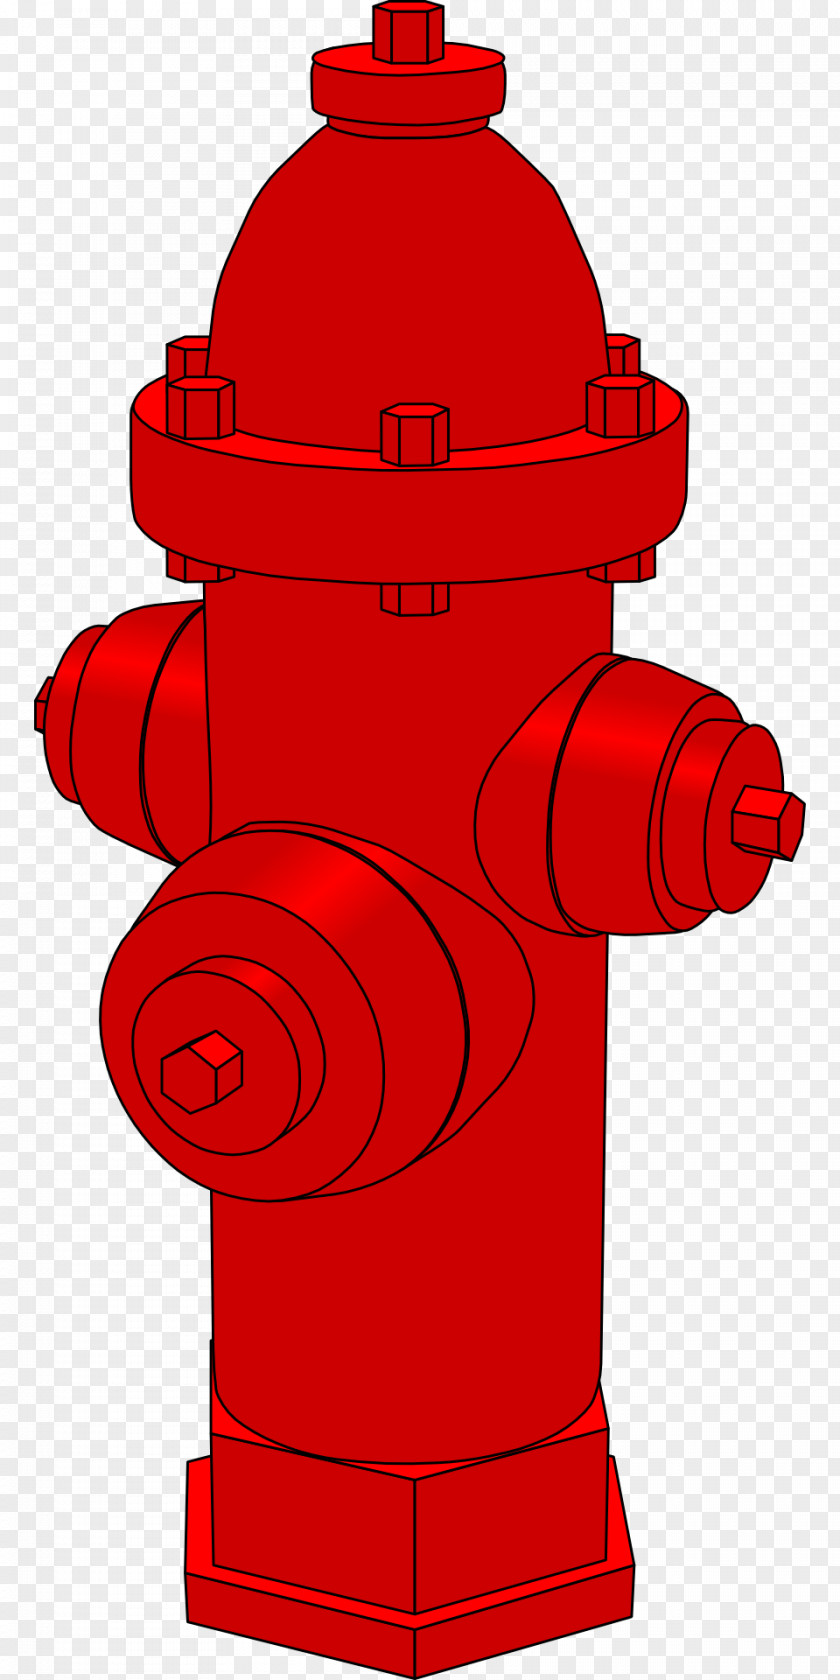 Firefighter Fire Hydrant Royalty-free Clip Art PNG